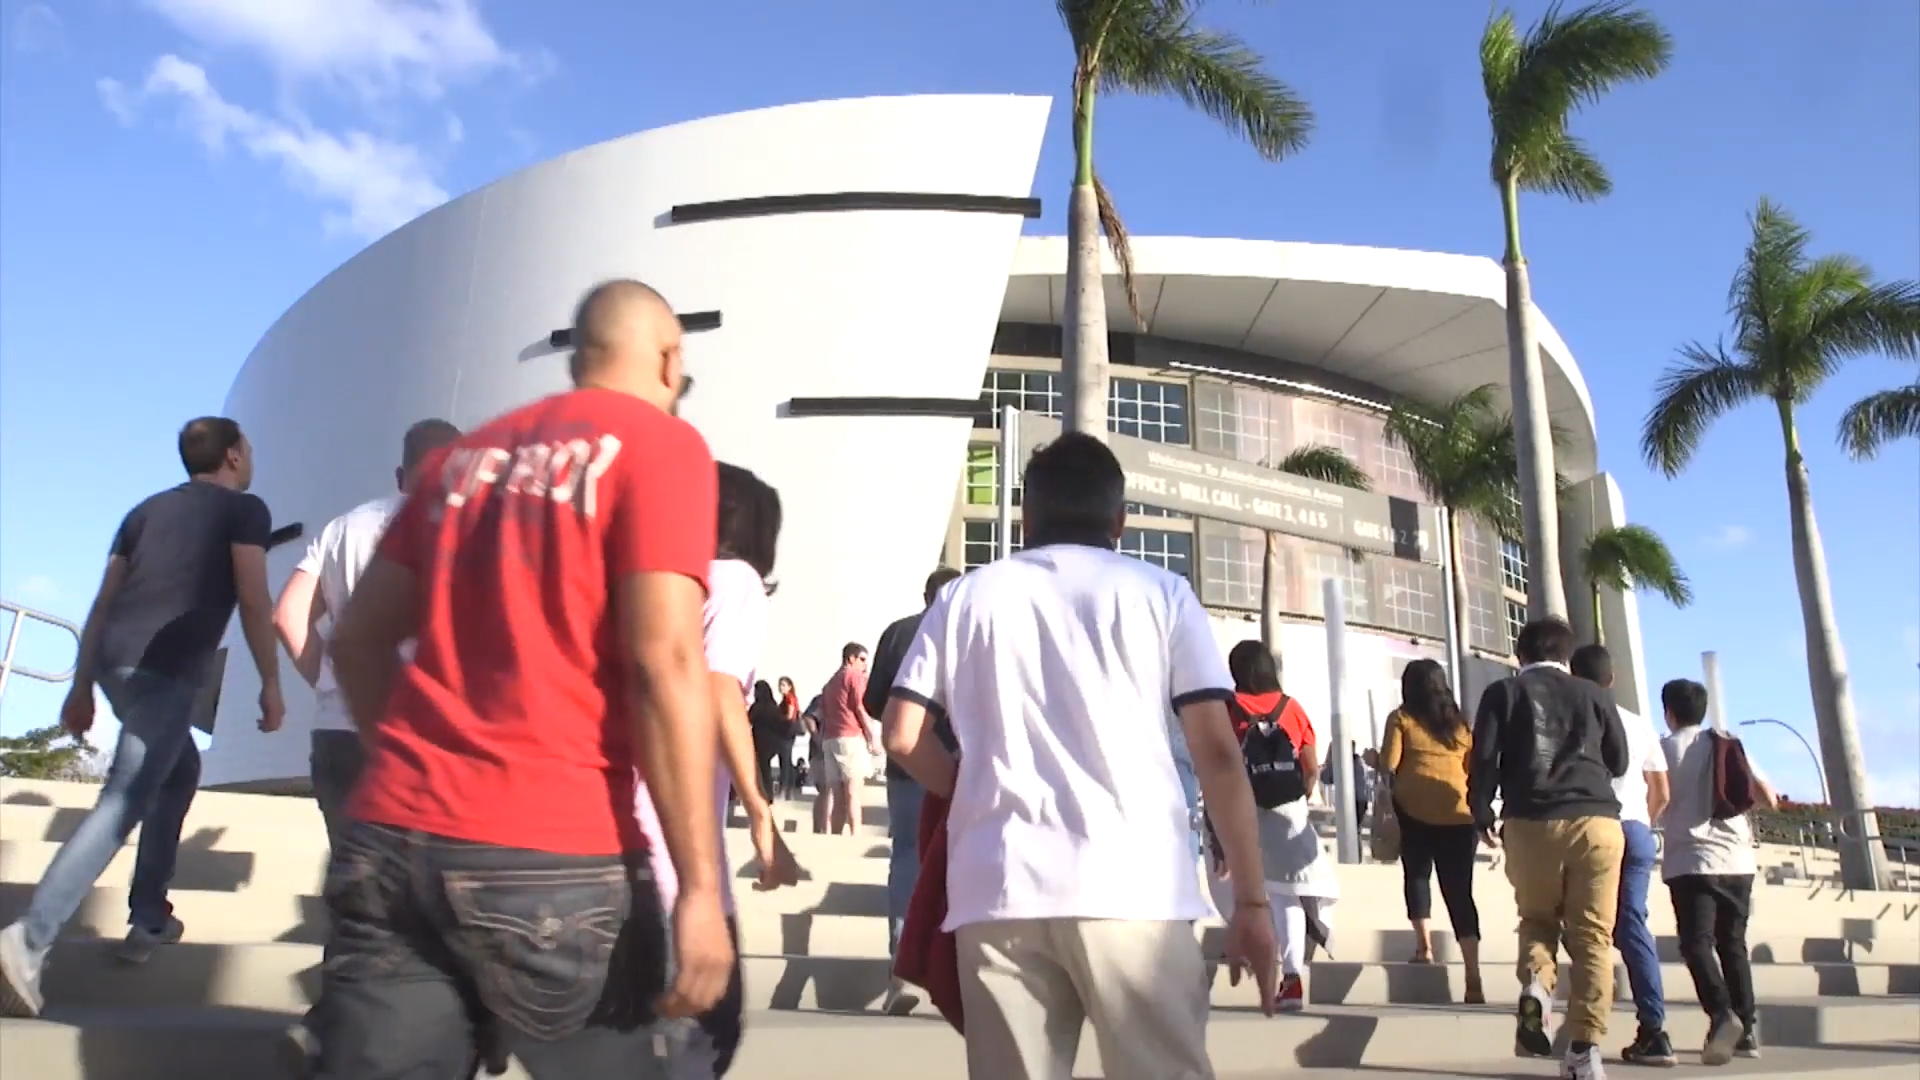 Fans walk into a Miami Heat basketball game from outside the arena.